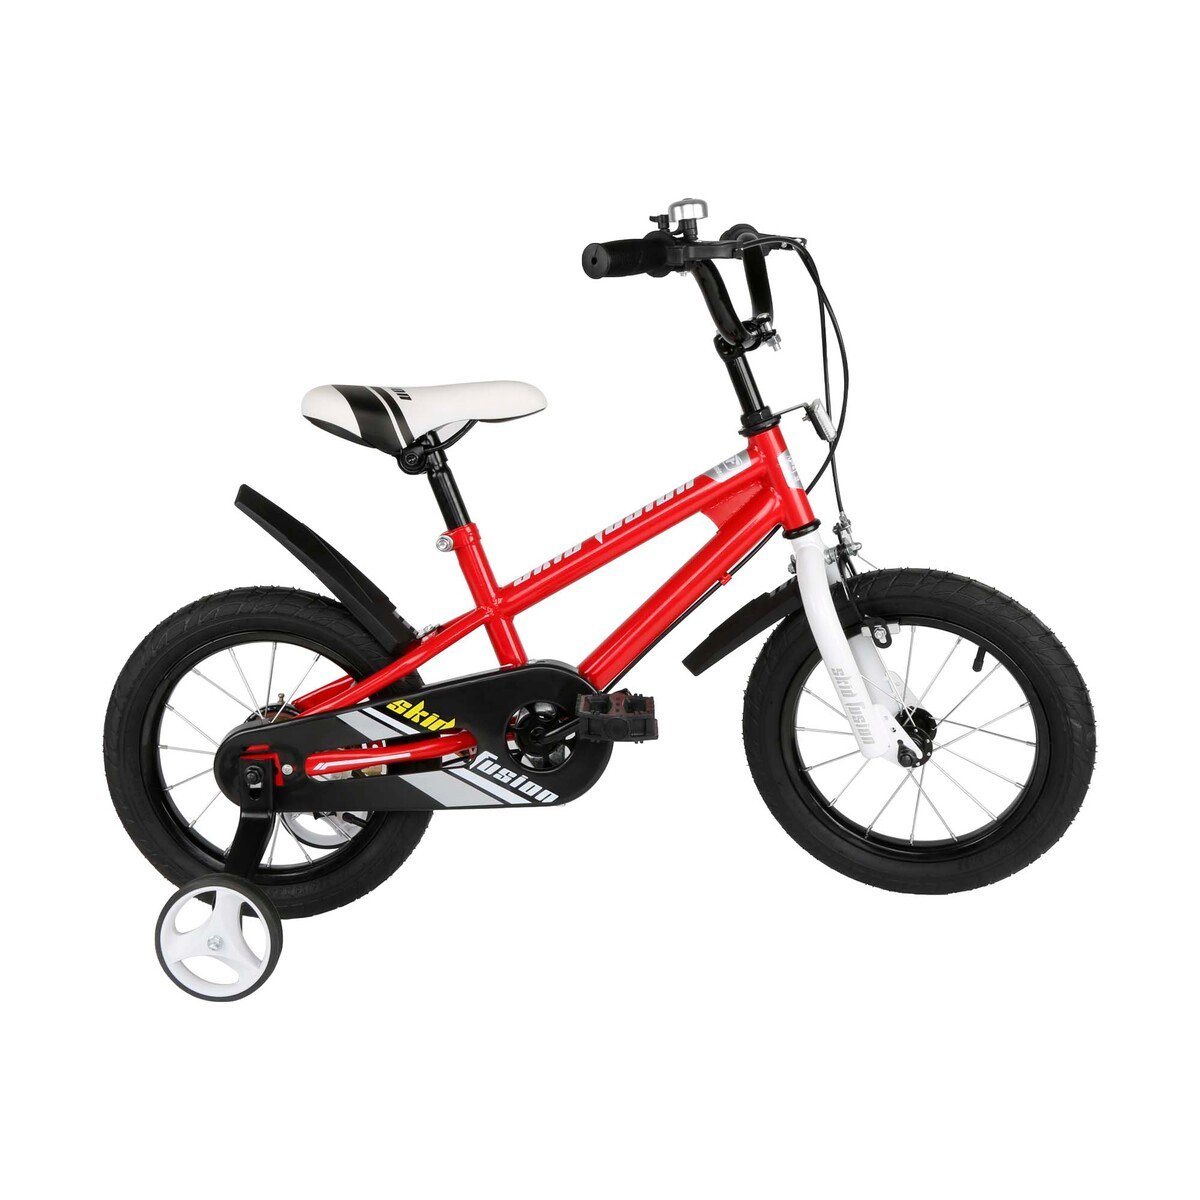 Skid Fusion Kids Bicycle 14" SI10-14 Red